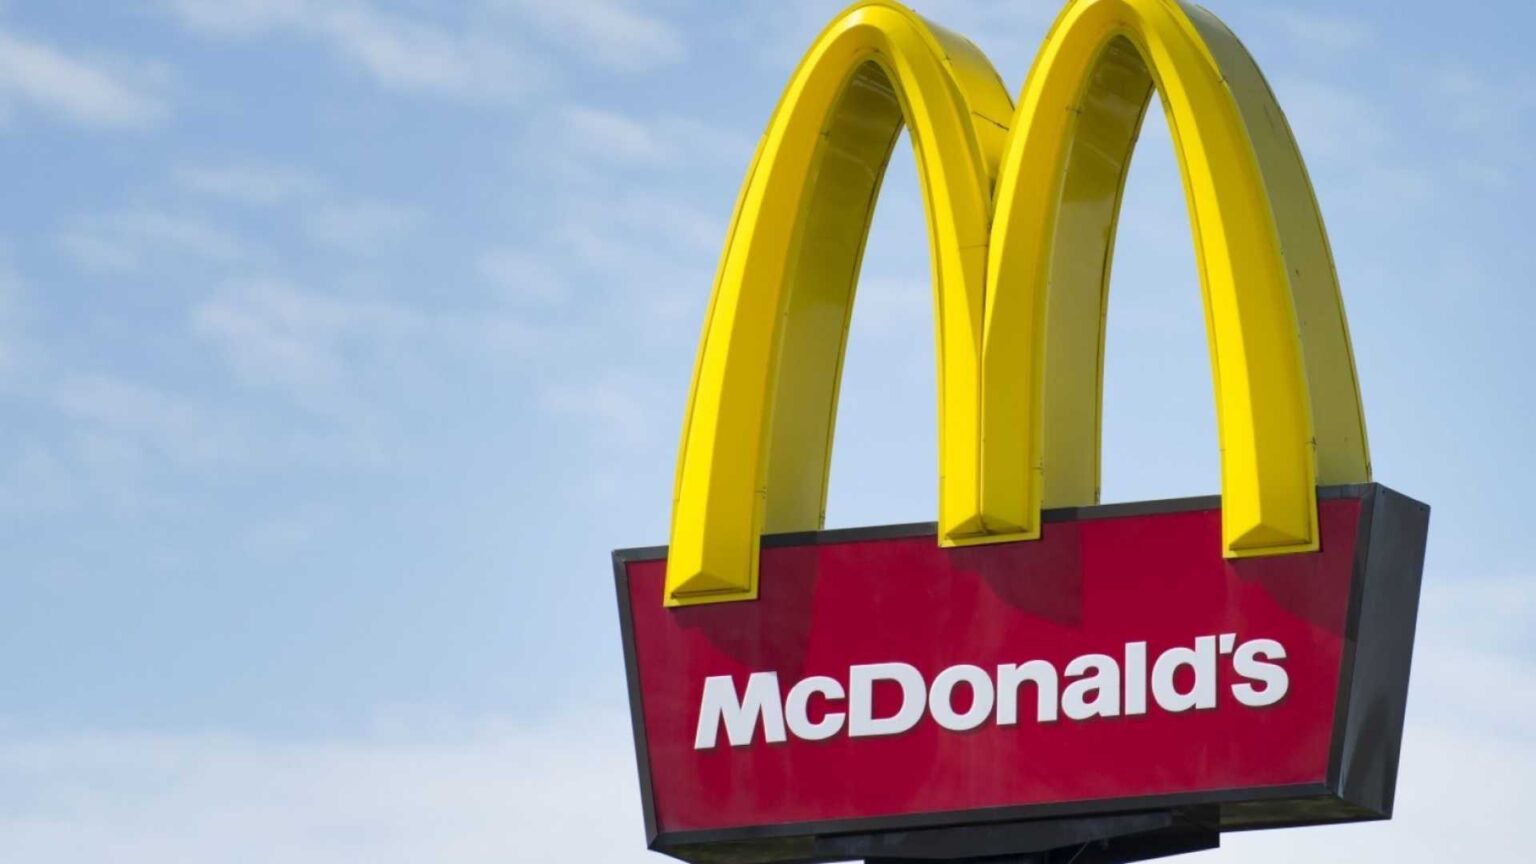 How far would you go to get your hands on some McDonald's dipping sauce? Find out why one man in Ankeny, Iowa threatened to bomb his local McDonald's.